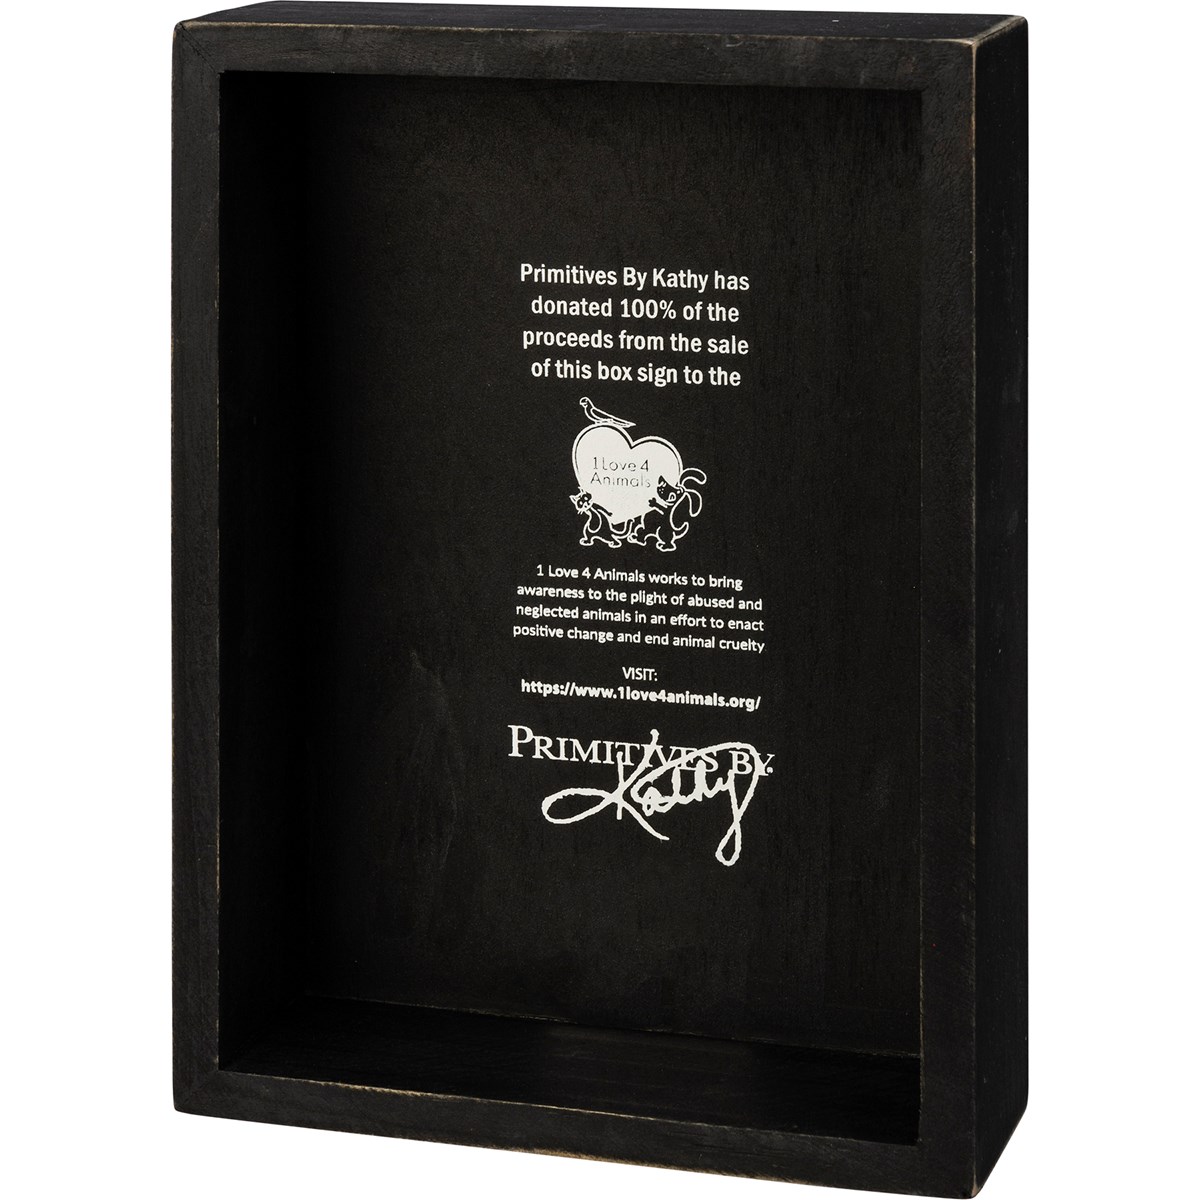 Box Sign - Unconditional Love - 5.75" x 8" x 1.75" - Wood